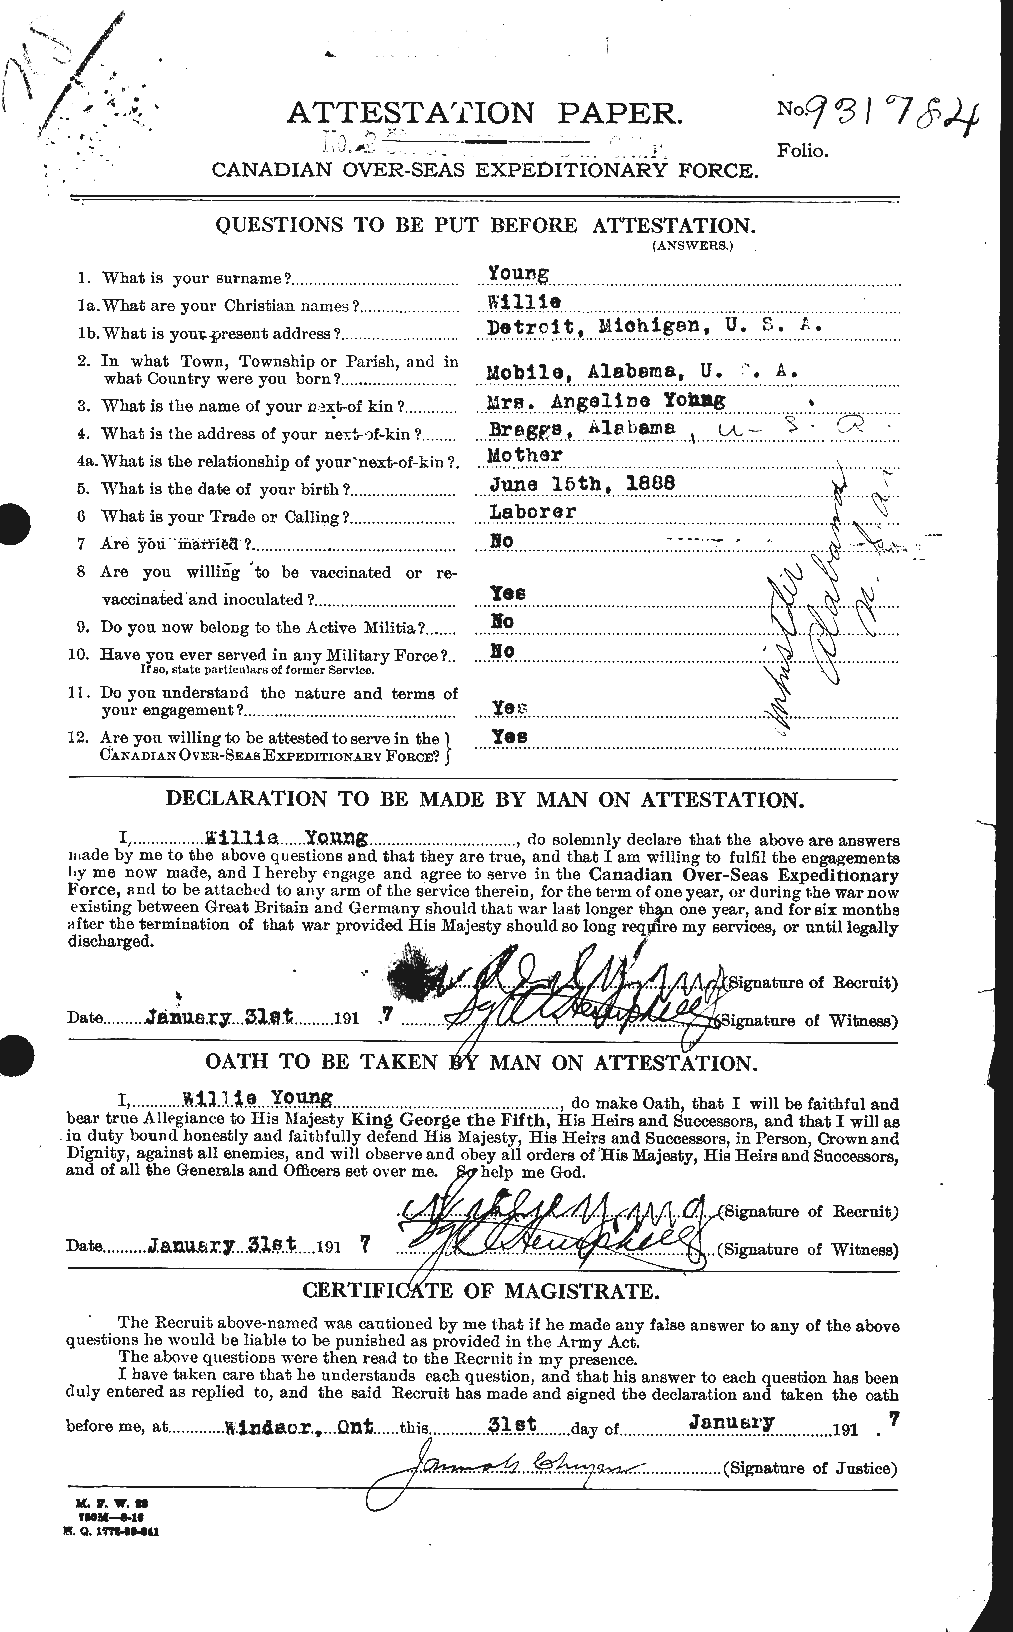 Personnel Records of the First World War - CEF 689697a